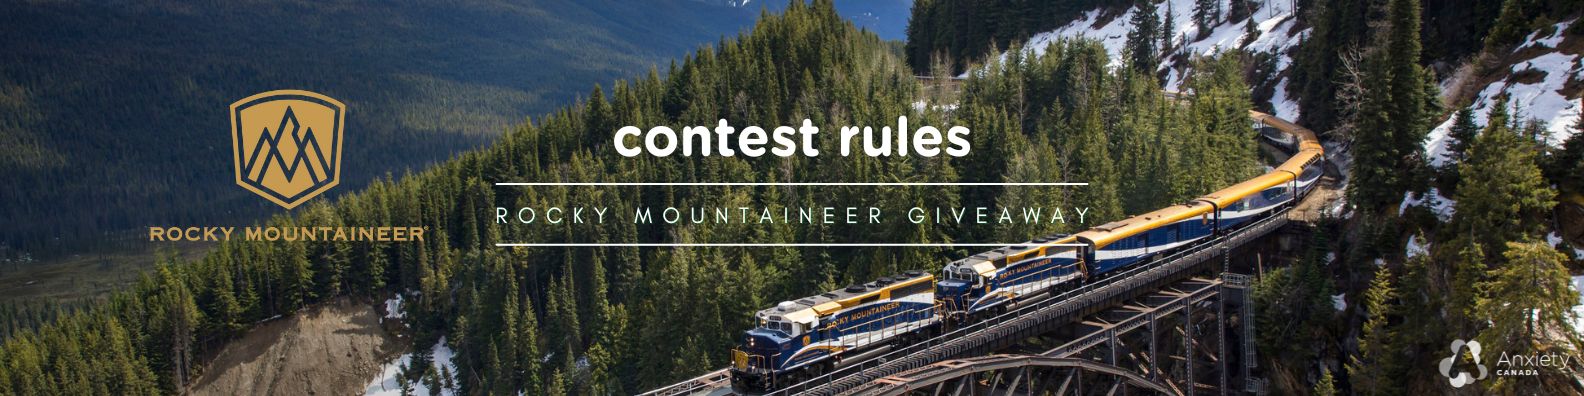 Contest Rules for Rocky Mountaineer Train Giveaway by Anxiety Canada